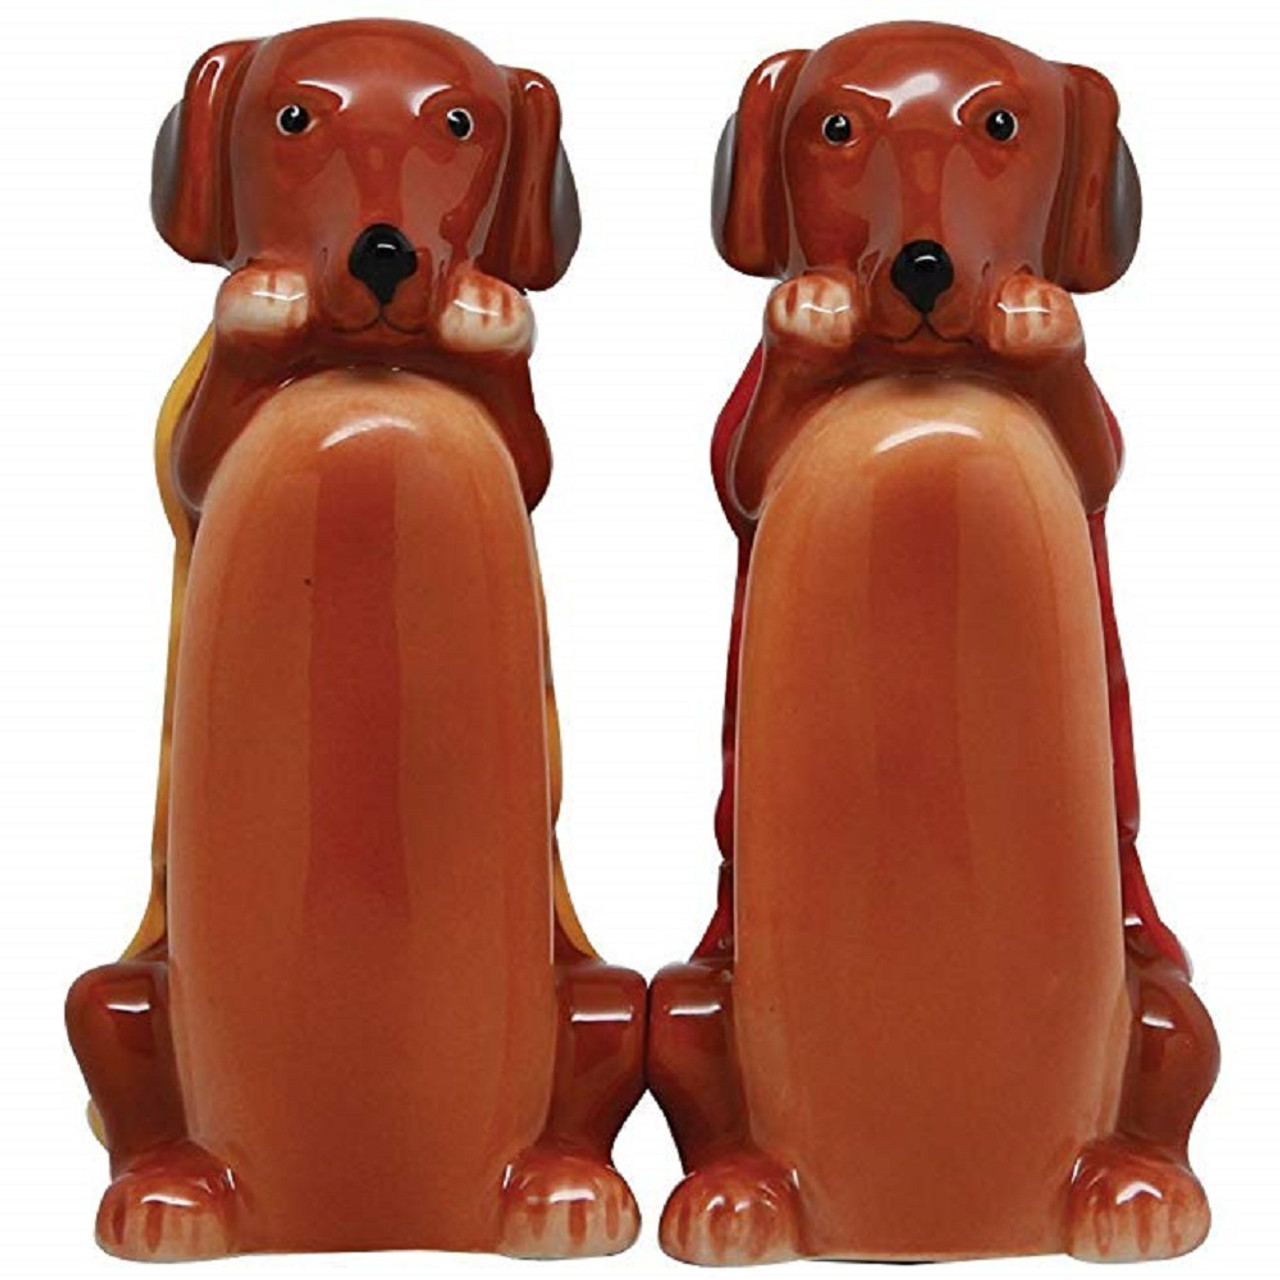 https://cdn11.bigcommerce.com/s-iiijx0/images/stencil/1280x1280/products/43770/81568/pac9477%20hot%20dogs%20salt%20and%20pepper%20shakers%201__15115.1701296554.jpg?c=2